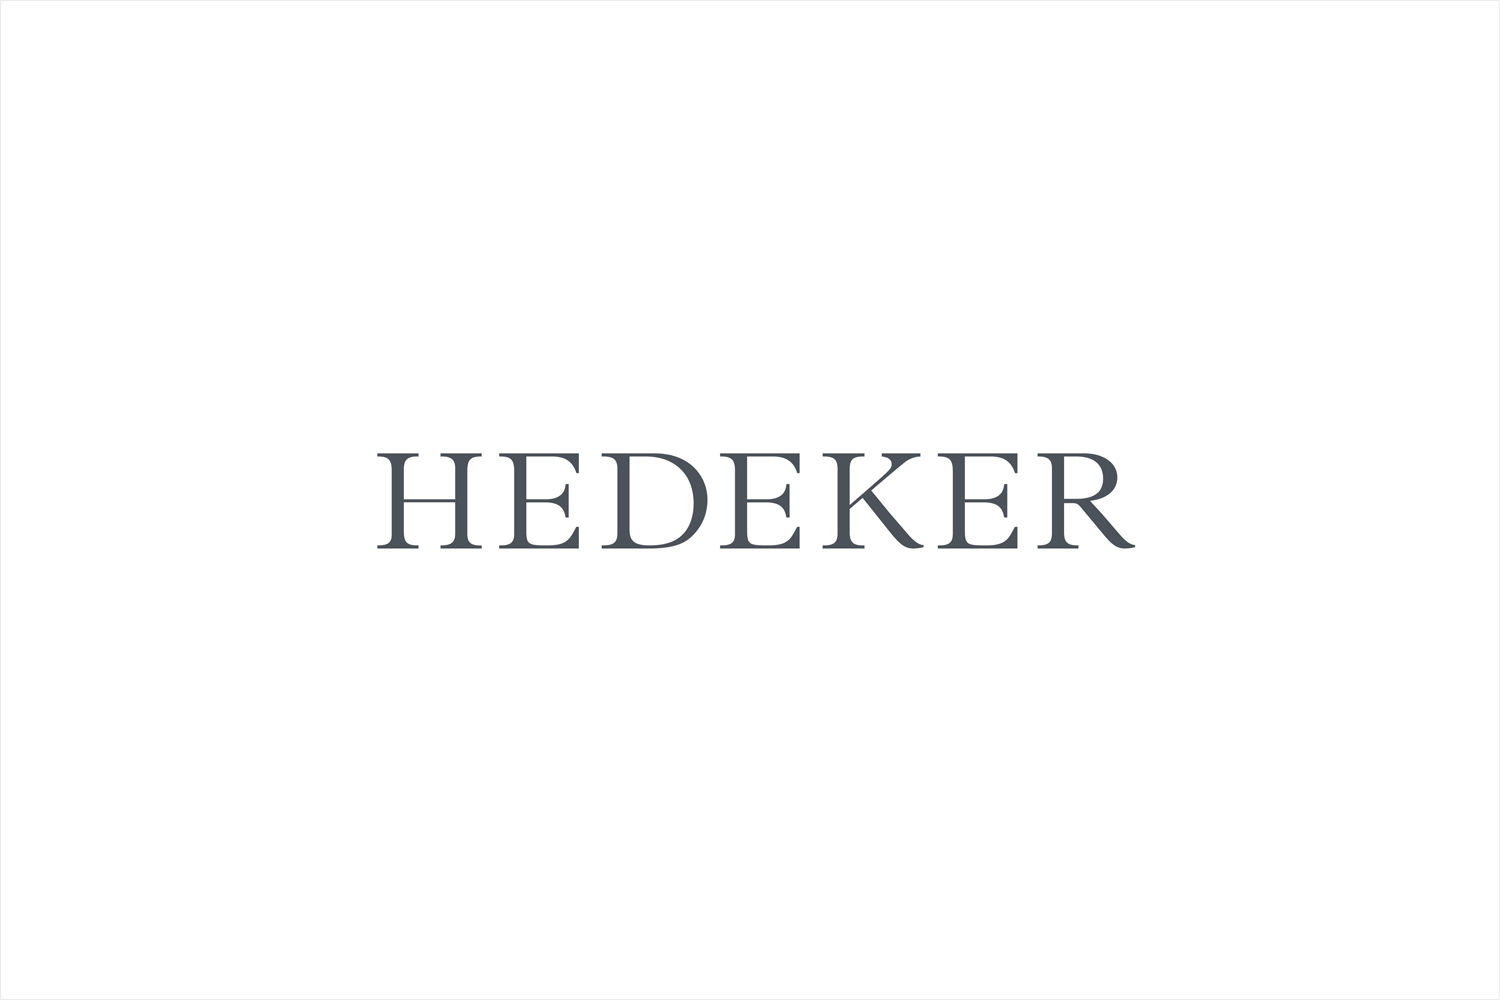 Logotype for Illinois based company Hedeker Wealth & Law by Socio Design